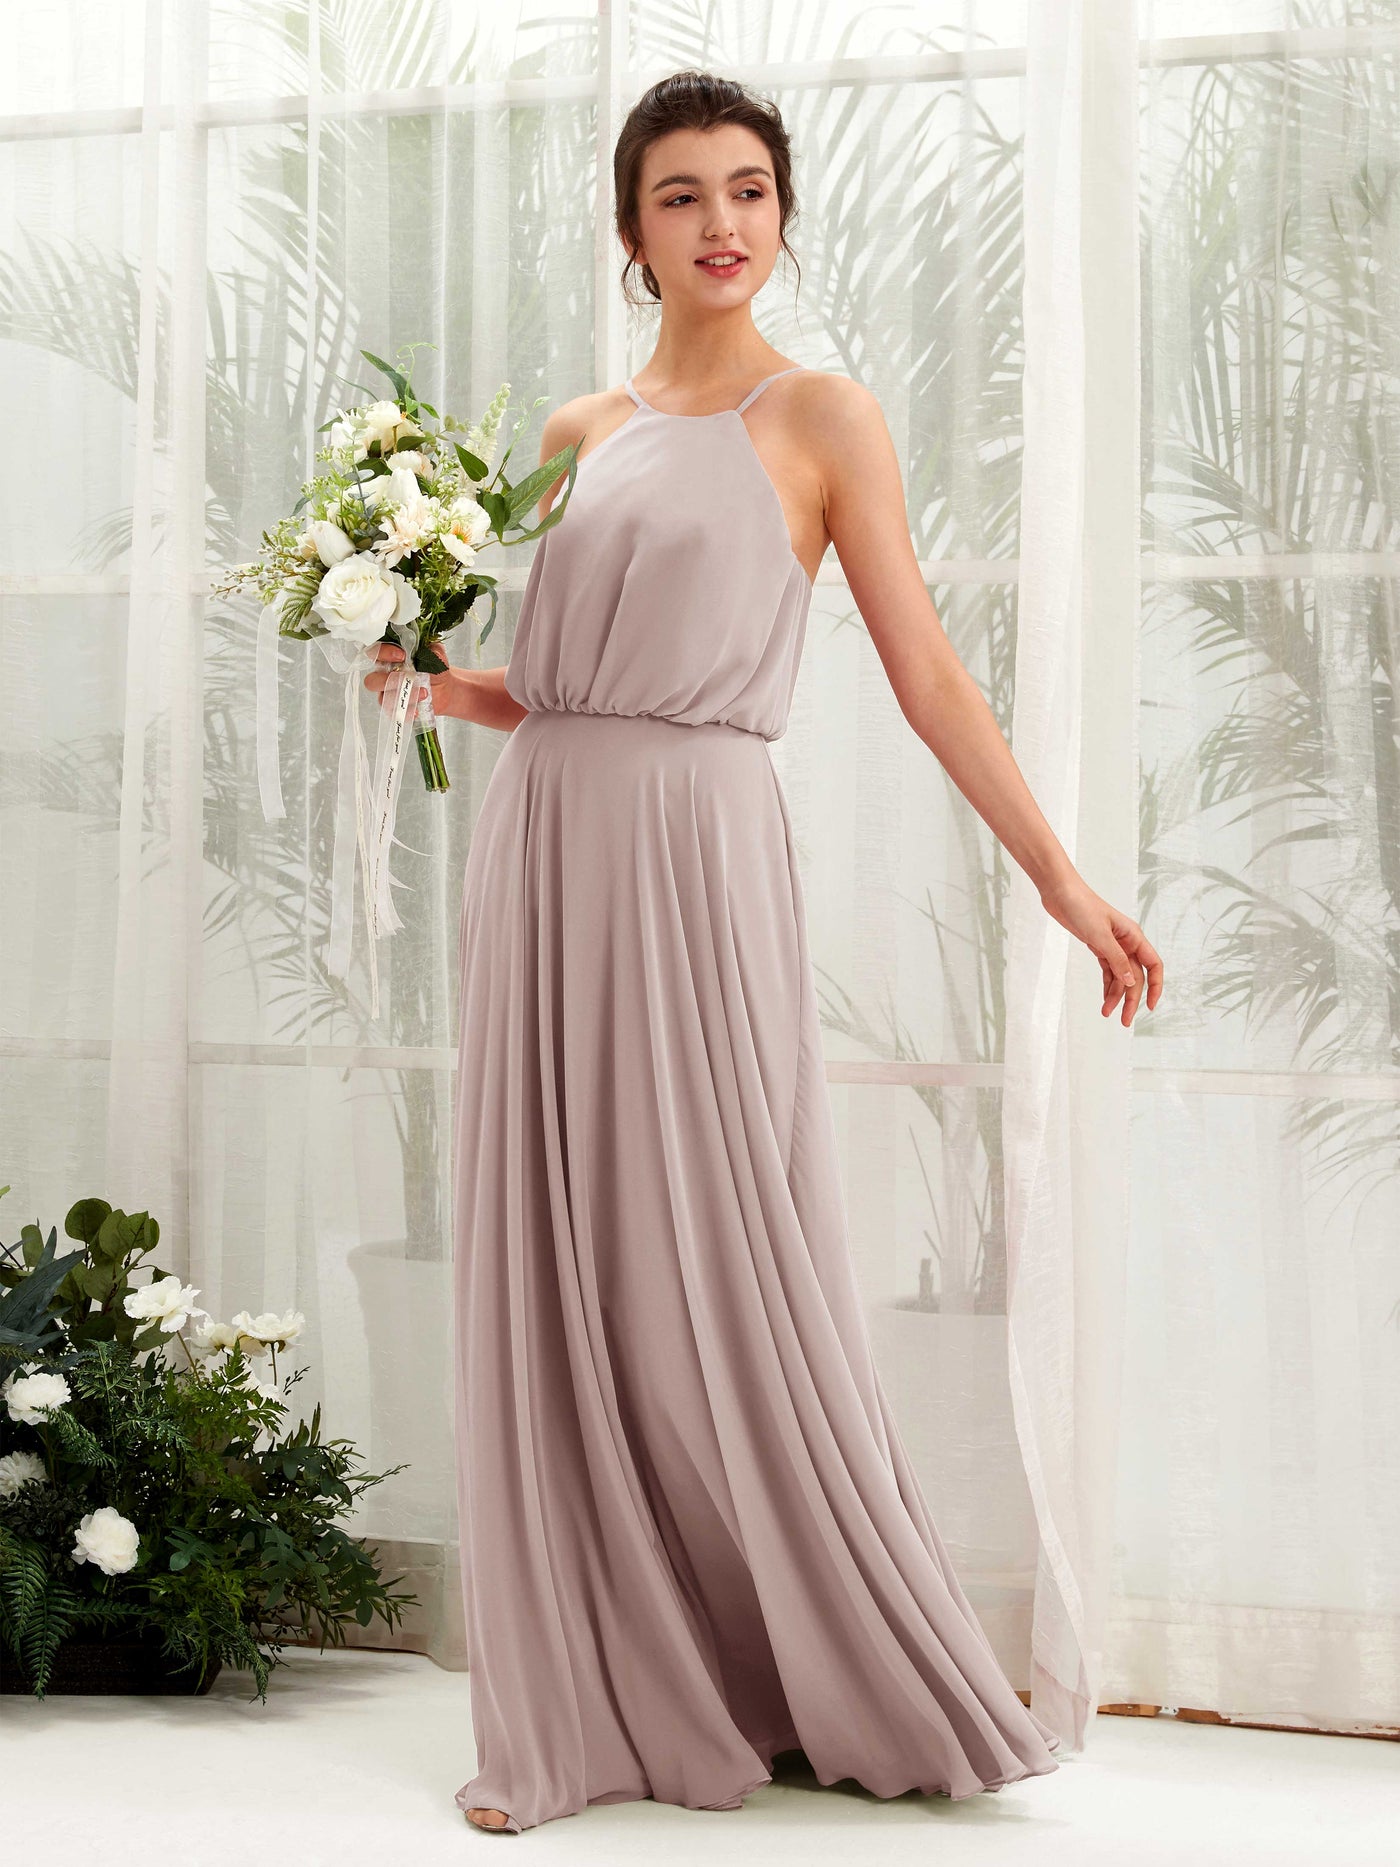 Taupe Bridesmaid Dresses Bridesmaid Dress Ball Gown Chiffon Halter Full Length Sleeveless Wedding Party Dress (81223424)#color_taupe